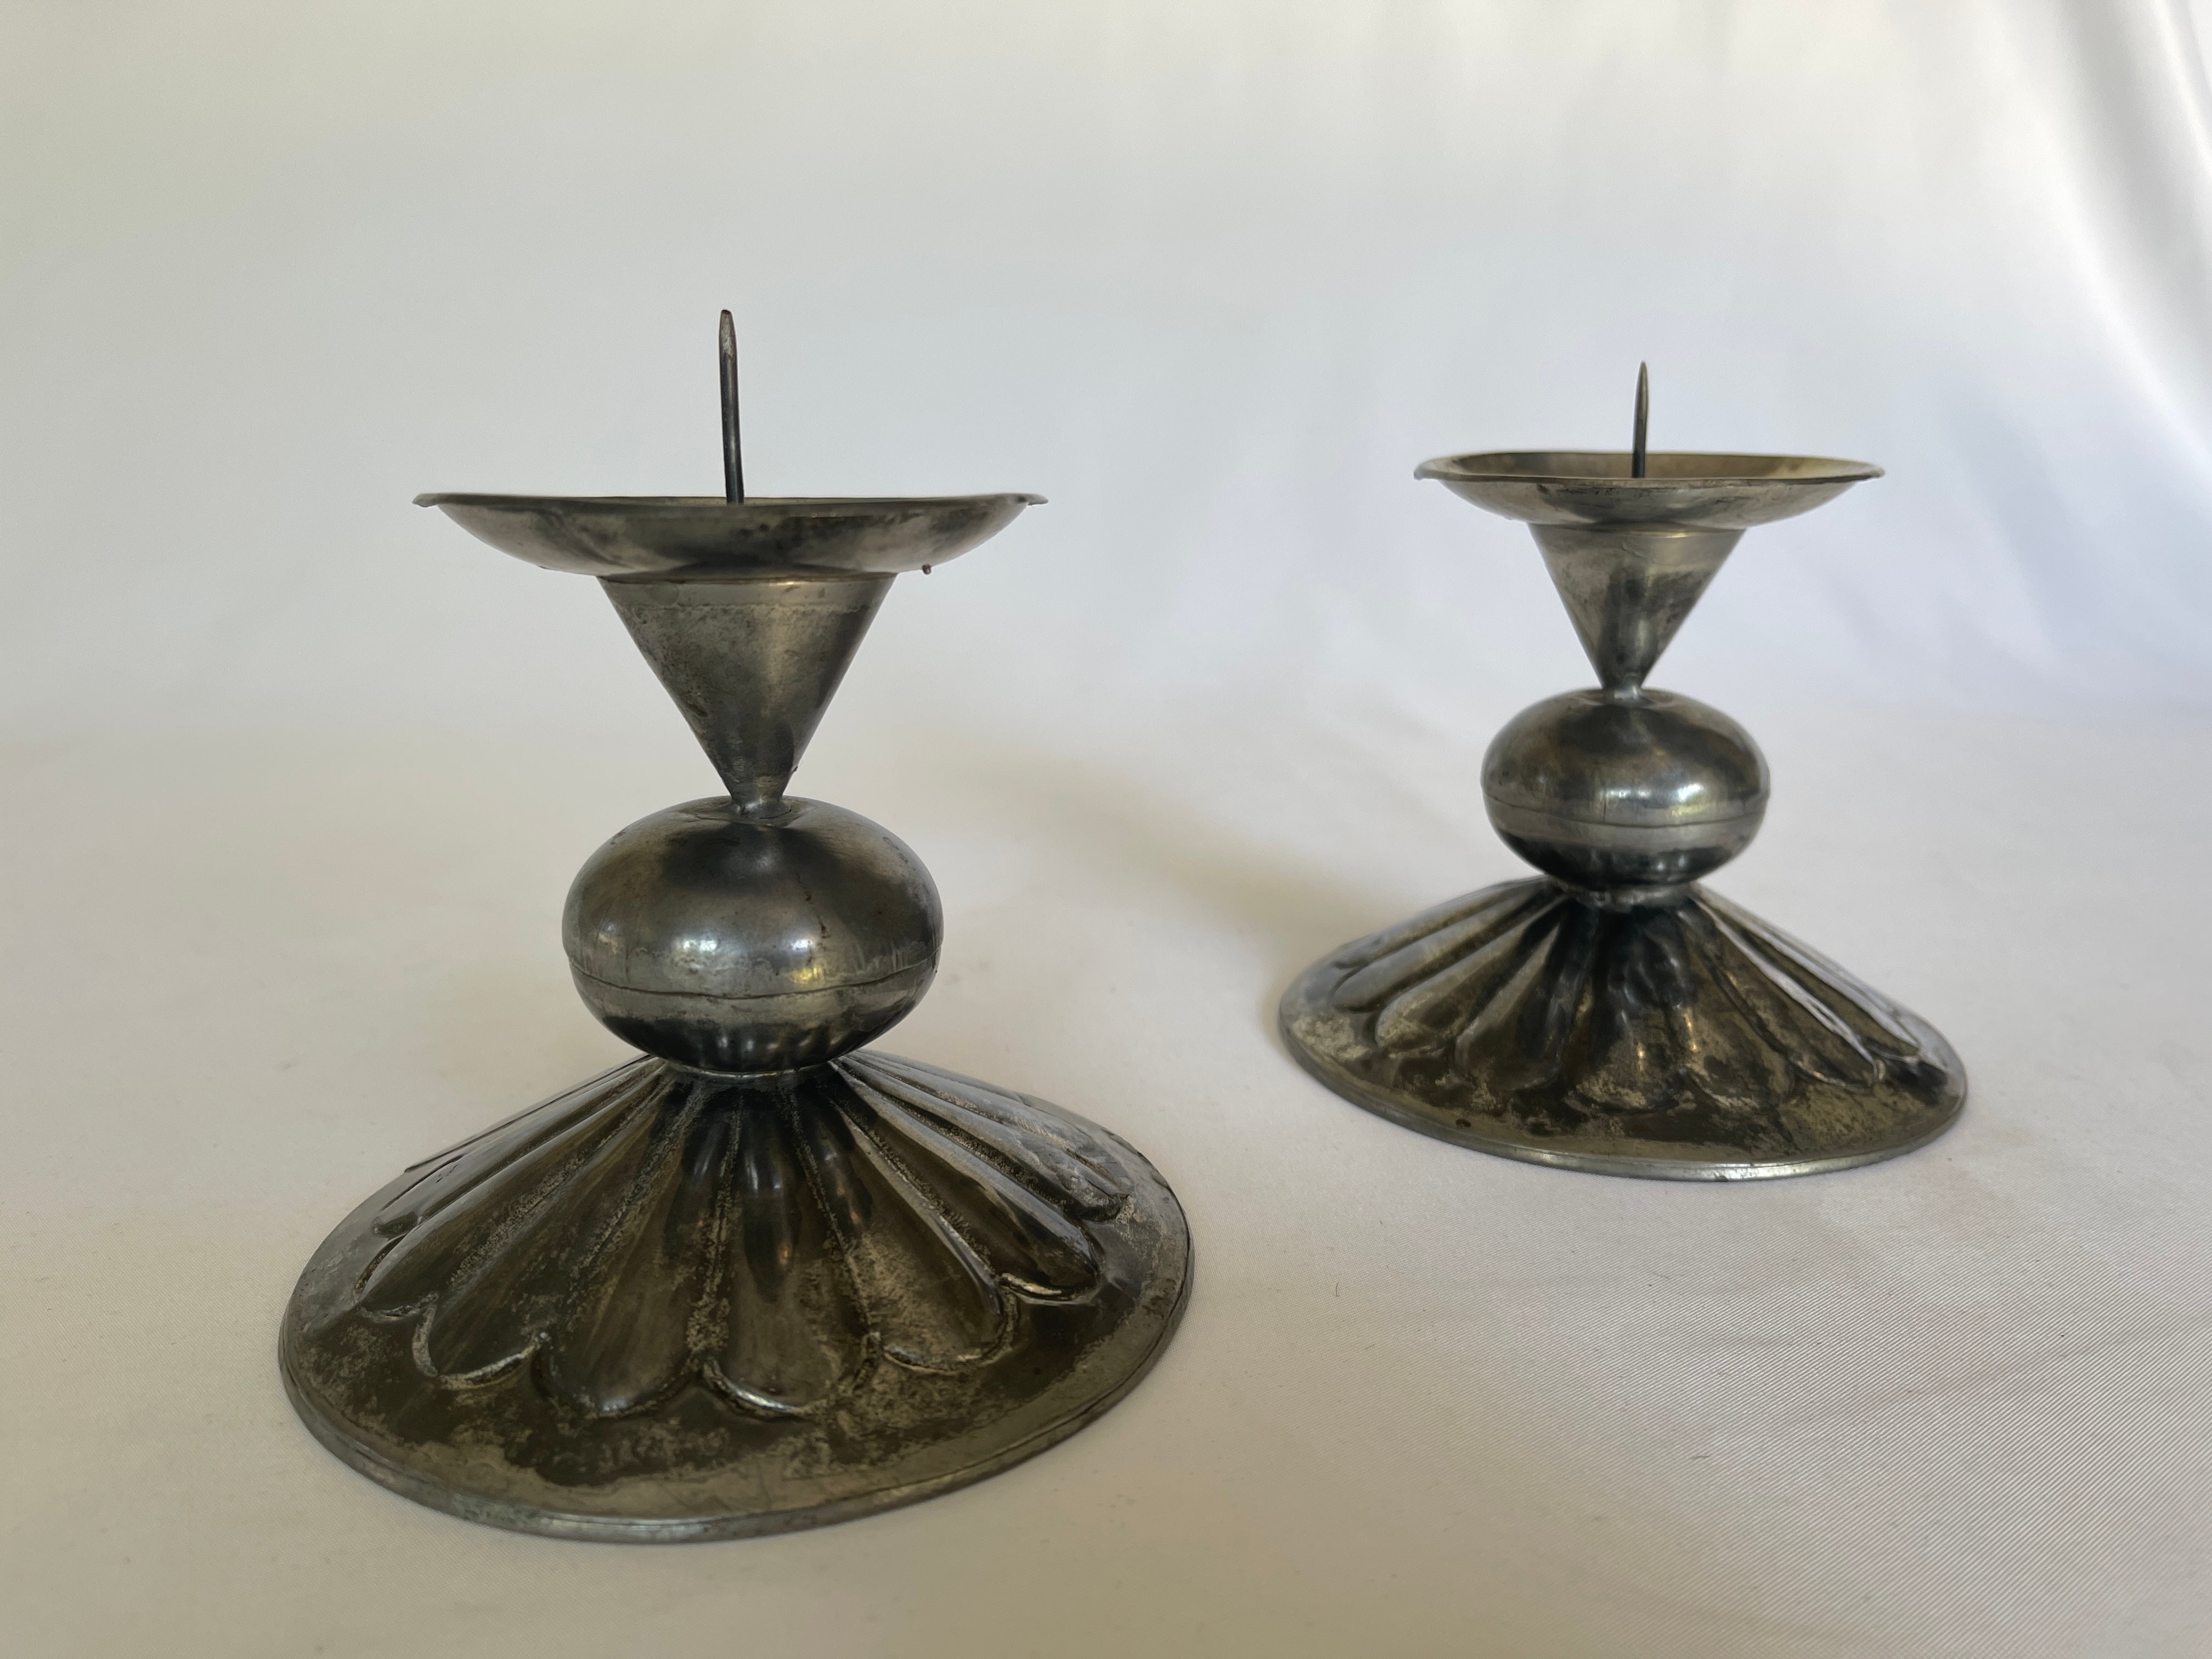 Pair of 1960's Mexican hand crafted tin candlestick pillars with hand tooled pattern on base. Signed with stamp on bottom, Mexico.